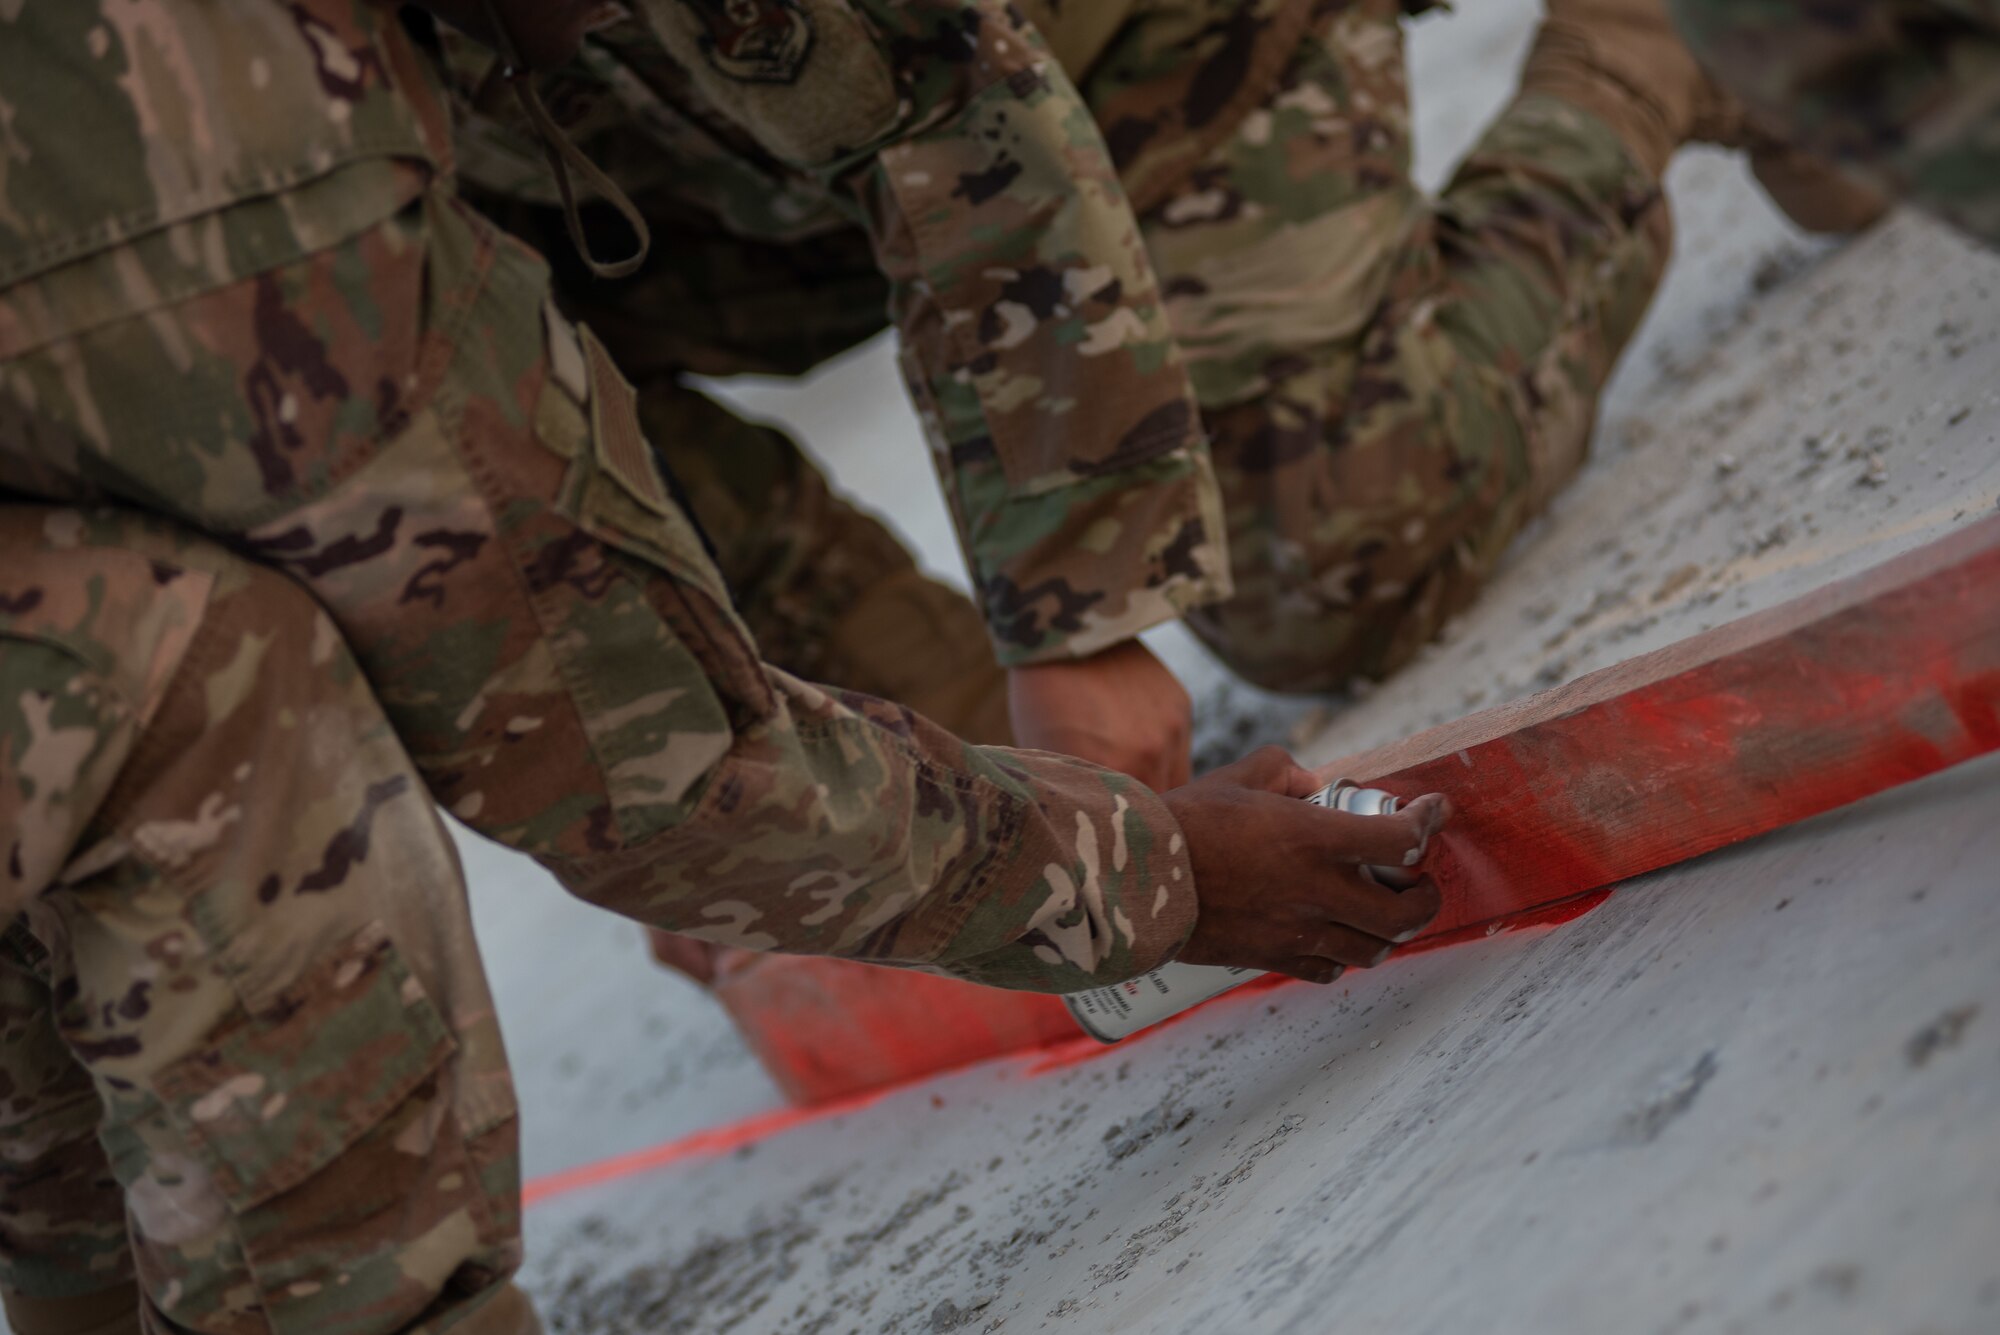 Three 380th Expeditionary Civil Engineer Squadron water and fuels technicians mark damaged areas during a rapid airfield damage repair exercise July 26, 2019, at Al Dhafra Air Base, United Arab Emirates. The damaged areas are broken up and removed, then replaced with fast-curing concrete to get the airfield operational quickly and efficiently. (U.S. Air Force photo by Staff Sgt. Chris Thornbury)